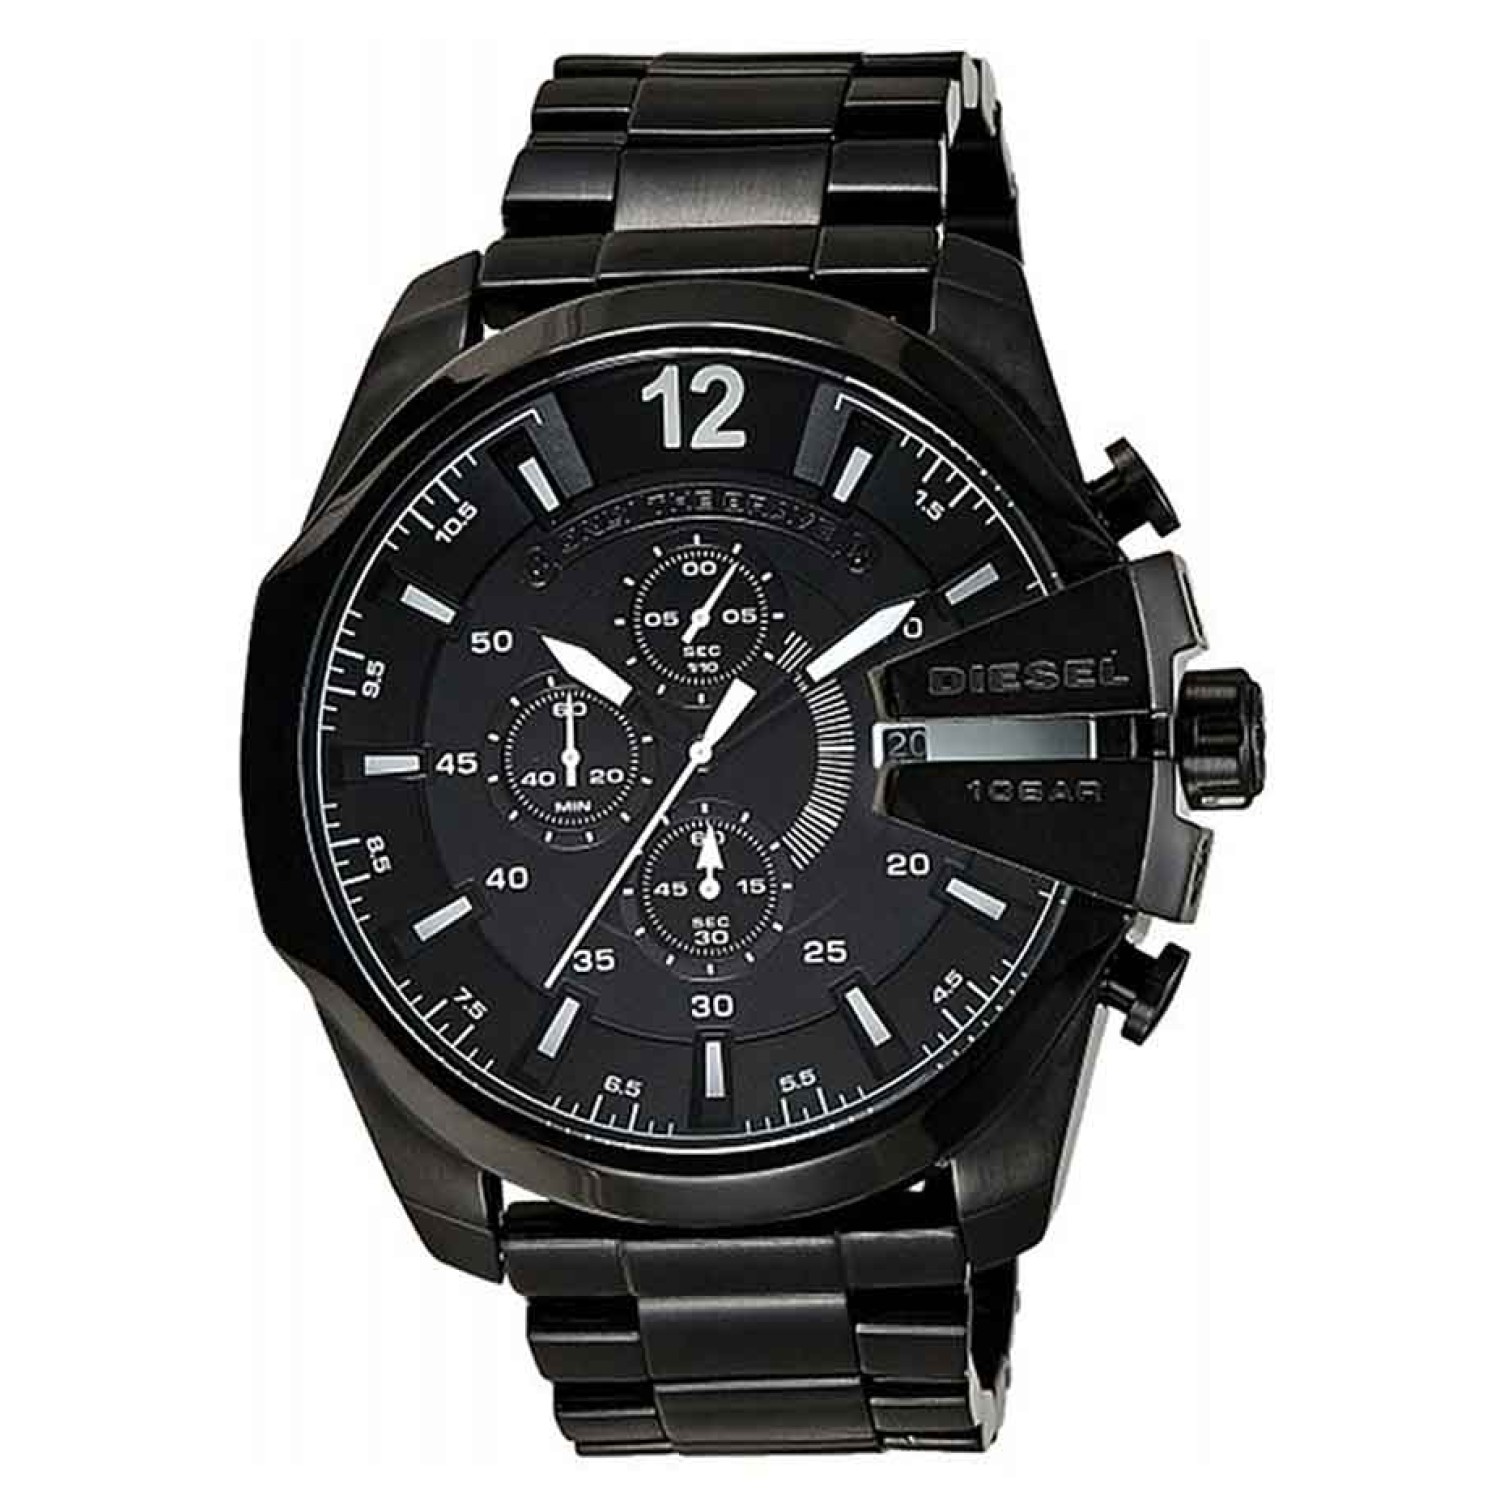 DZ4283 Diesel Master Chief Chronograph Watch. This eye catching design is part of the Mega Chief collection from Diesel. This DZ4283  watch is made from black ion-plated steel and features a big 51mm case. The black dial features high-vis baton hour marke